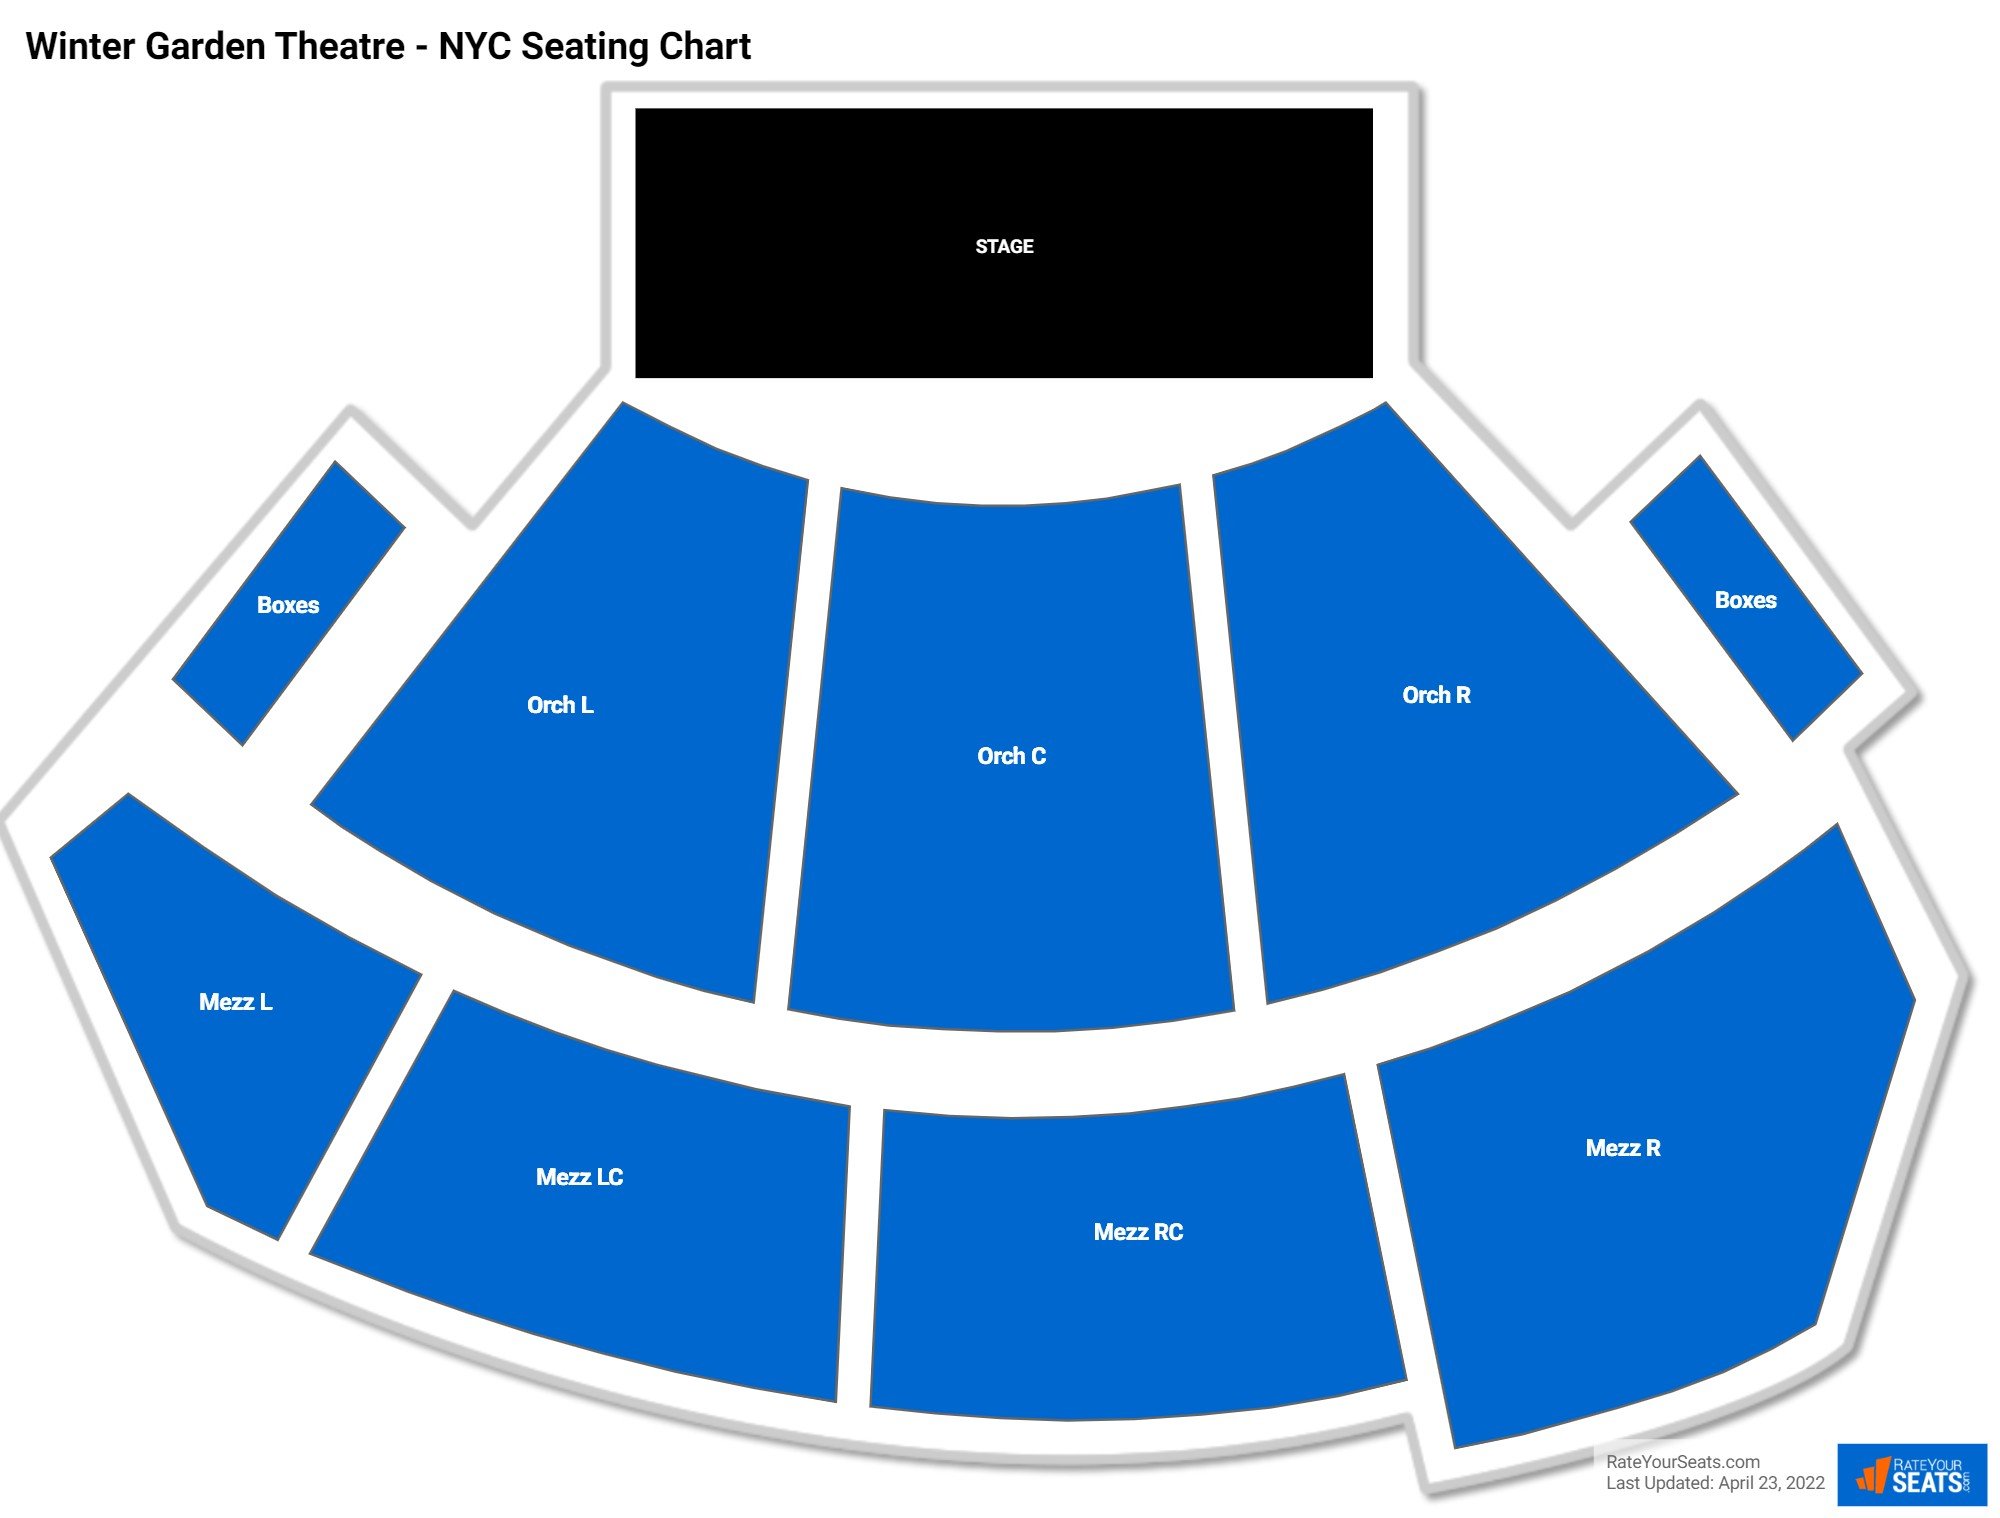 Winter Garden Theatre - NYC Theater Seating Chart